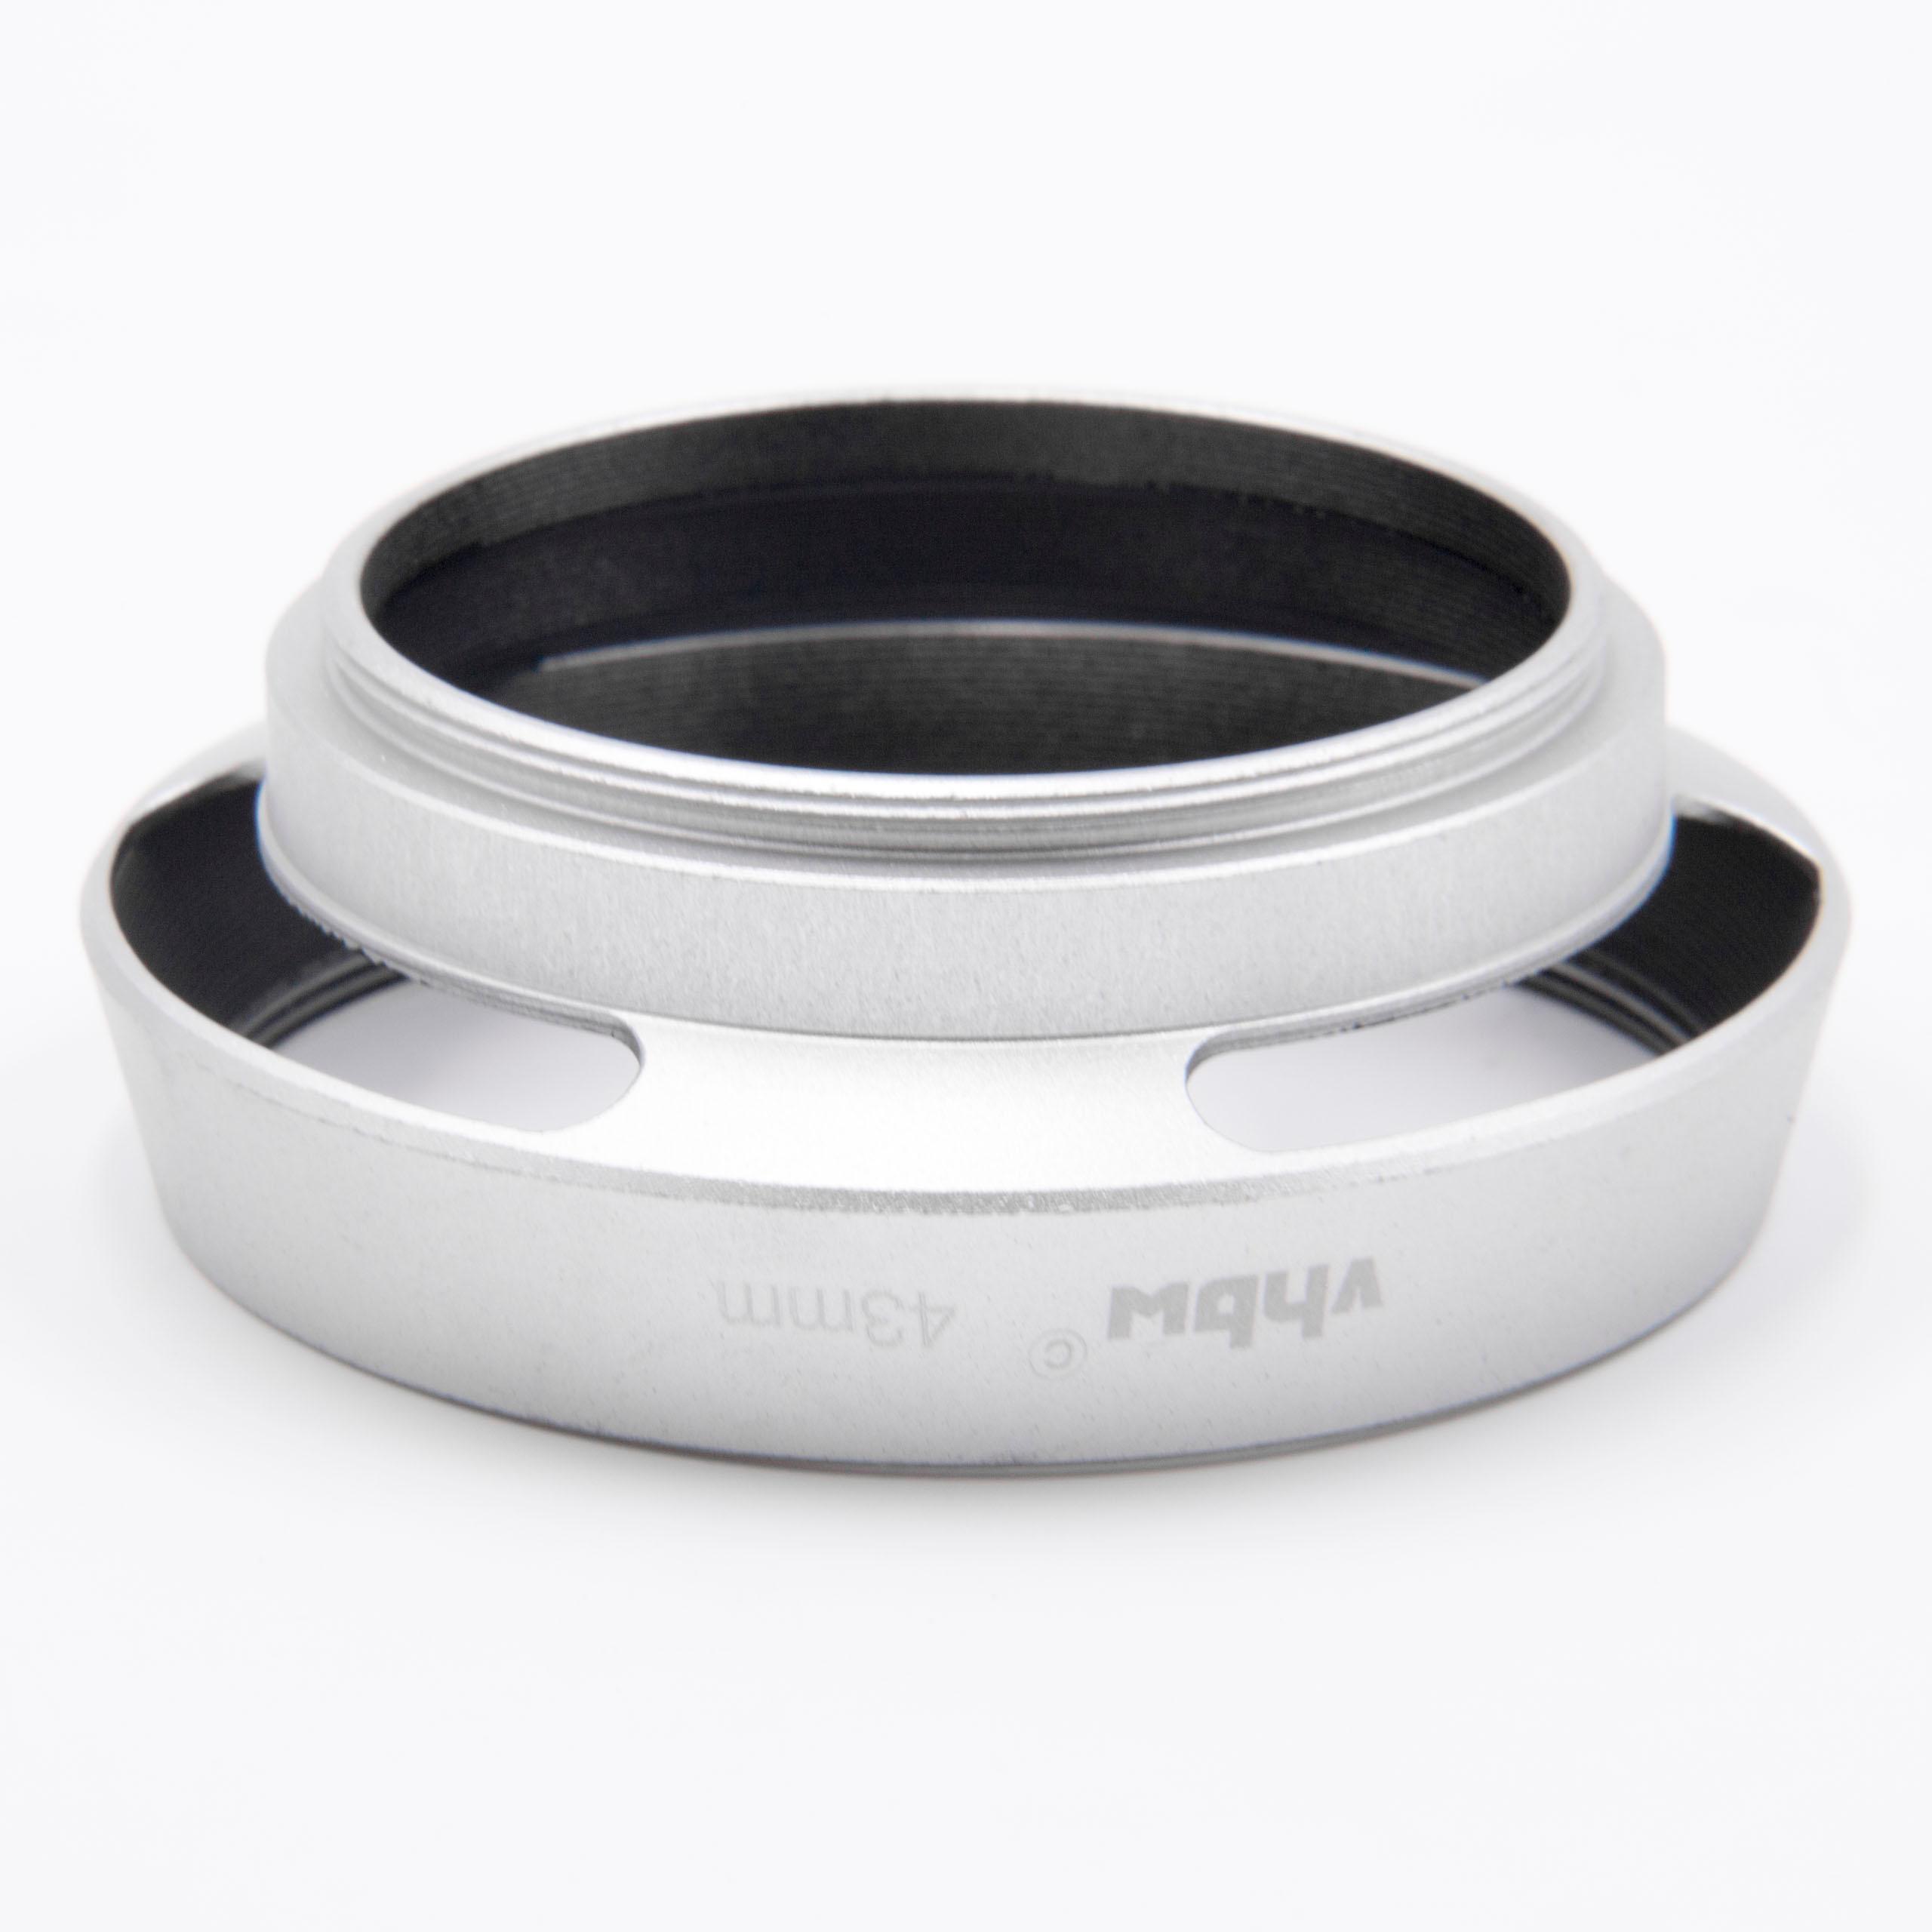 Lens Hood suitable for 43mm Lens - Lens Shade Silver, Round